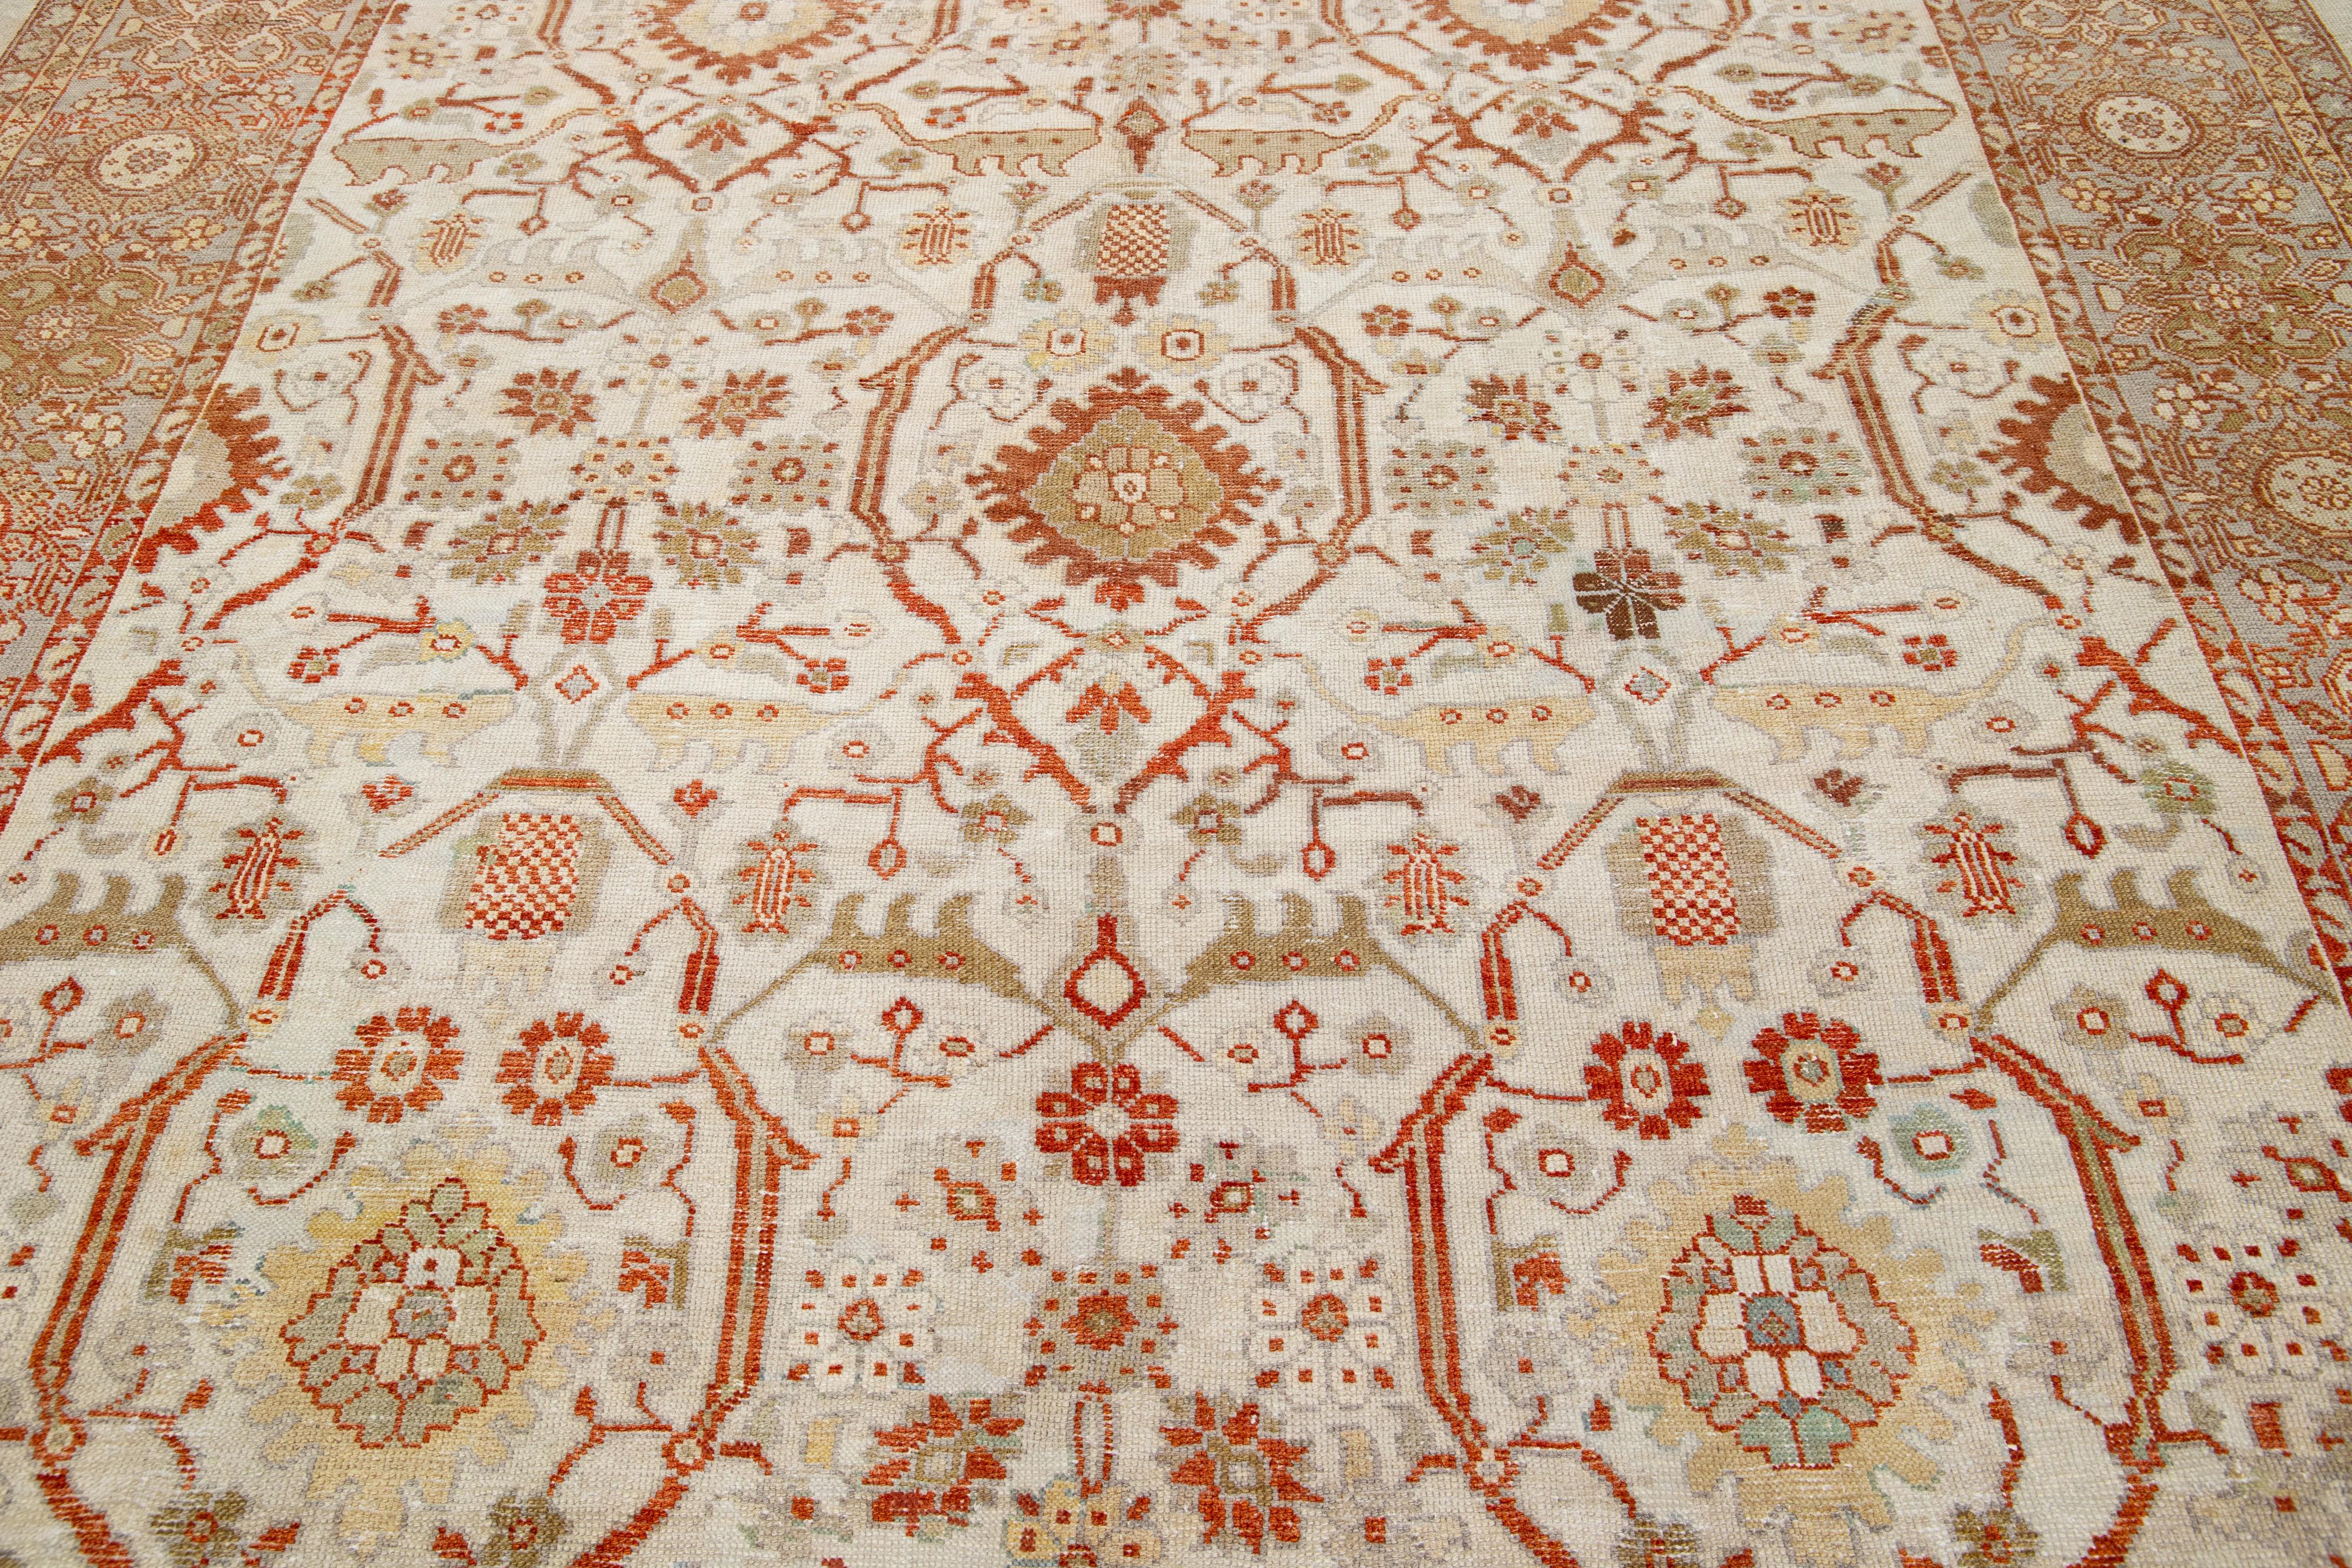 20th Century 1900s Sultanabad Persian Gallery Wool Rug In Beige and Orange With Floral Motif For Sale